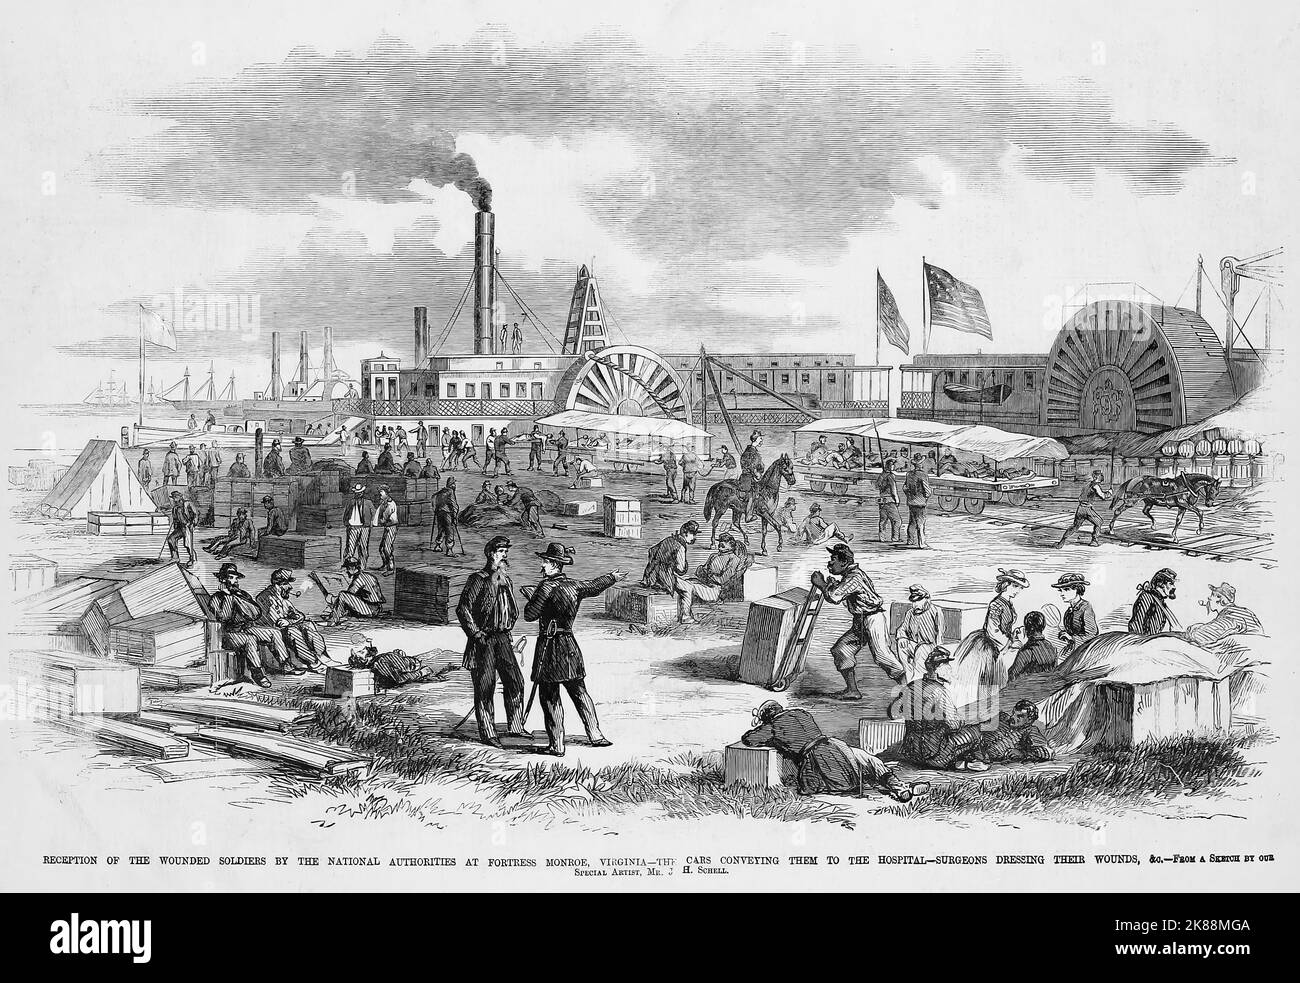 Reception of the wounded soldiers by the National authorities at Fort Monroe, Virginia - The cars conveying them to the hospital - Surgeons dressing their wounds. August 1862. 19th century American Civil War illustration from Frank Leslie's Illustrated Newspaper Stock Photo